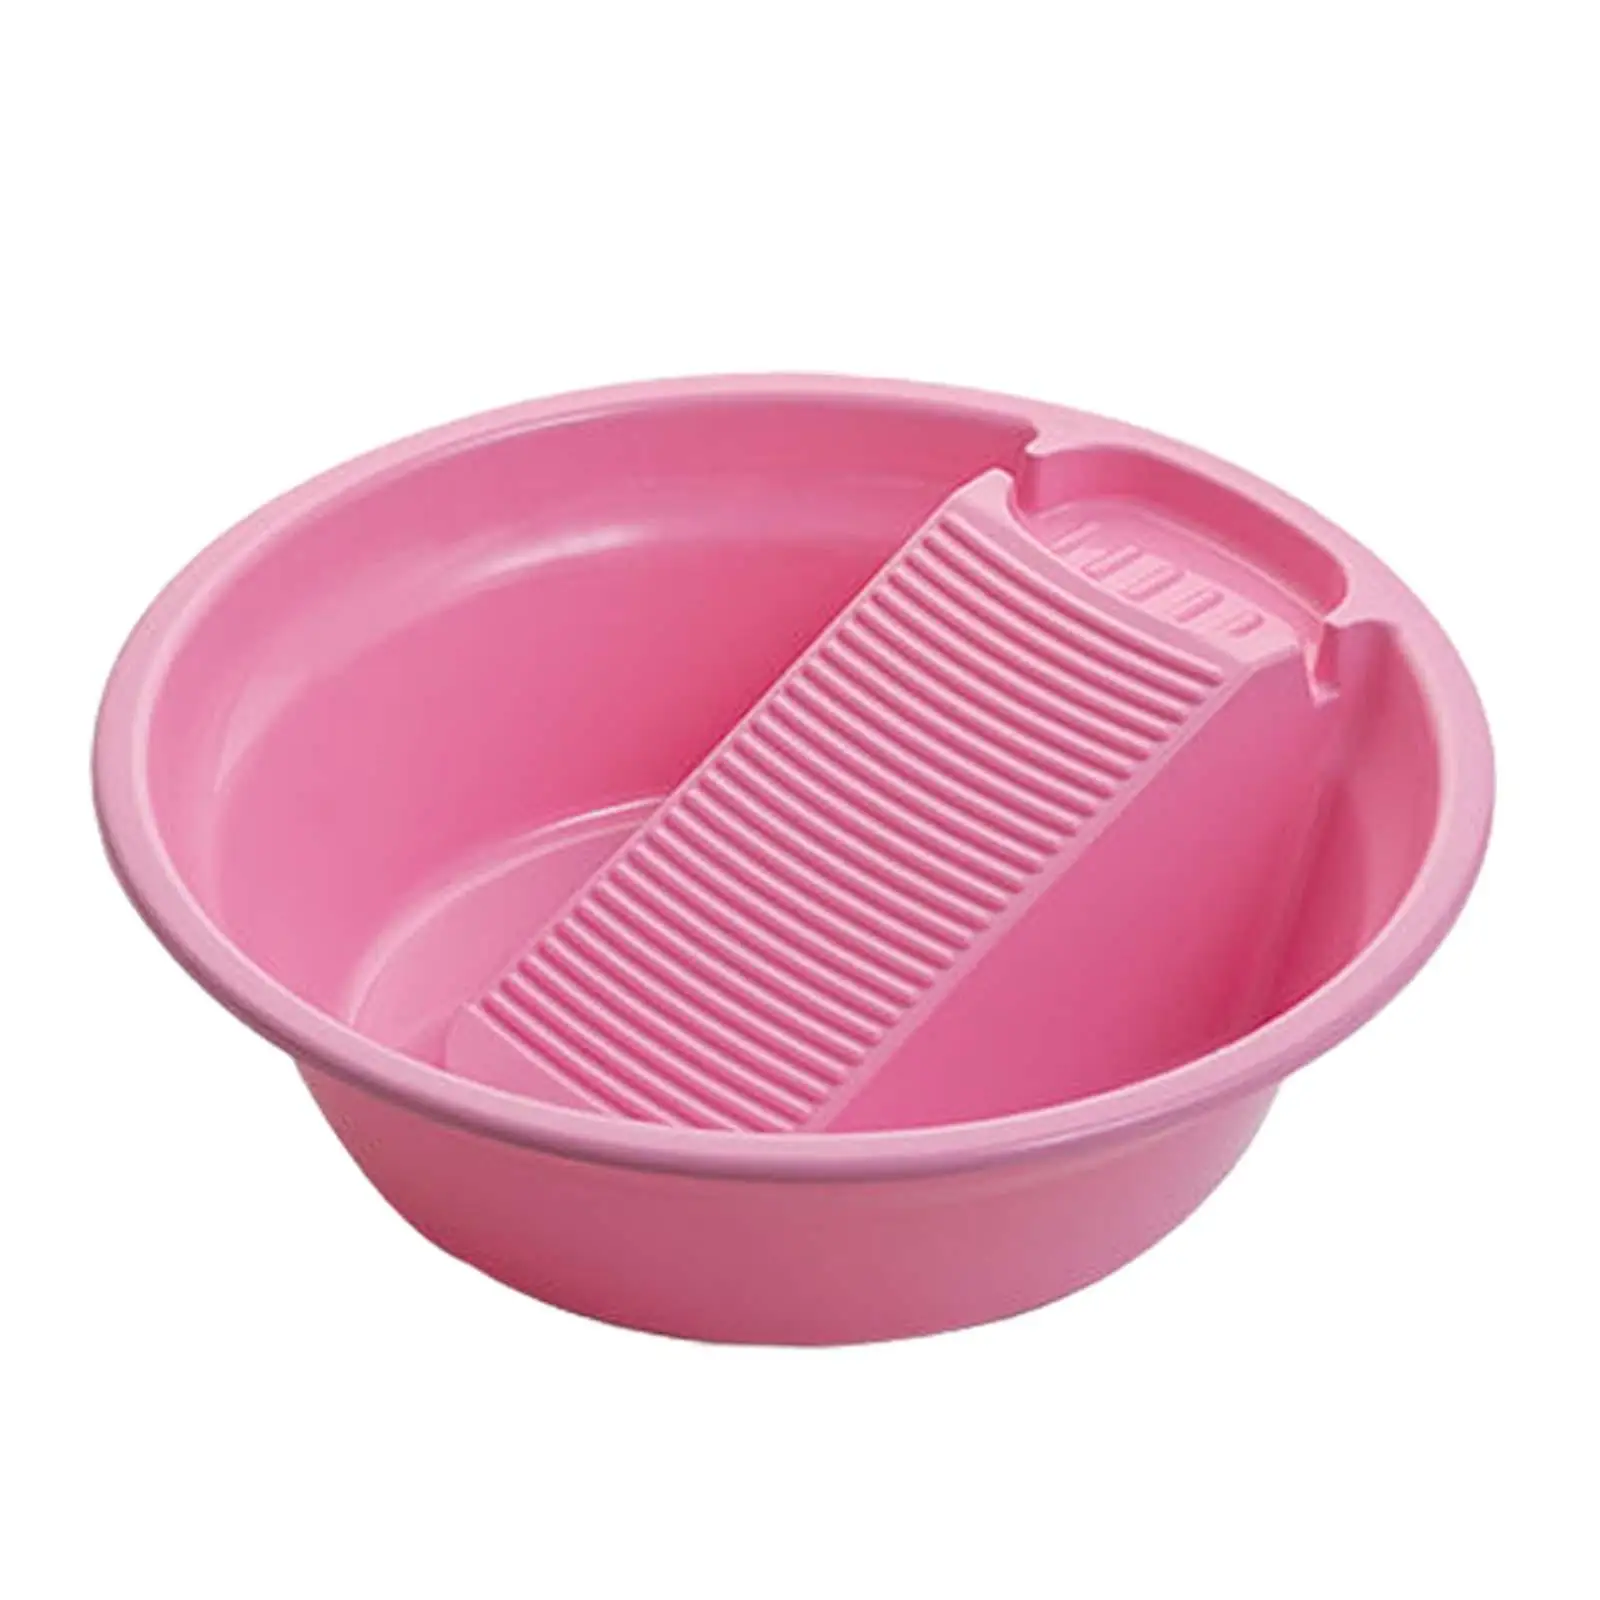 Washboard Basin Thickened Non Slip Basin for Laundry Integrated Laundry Washboard for Blouses Socks T Shirts Outdoor Bathroom